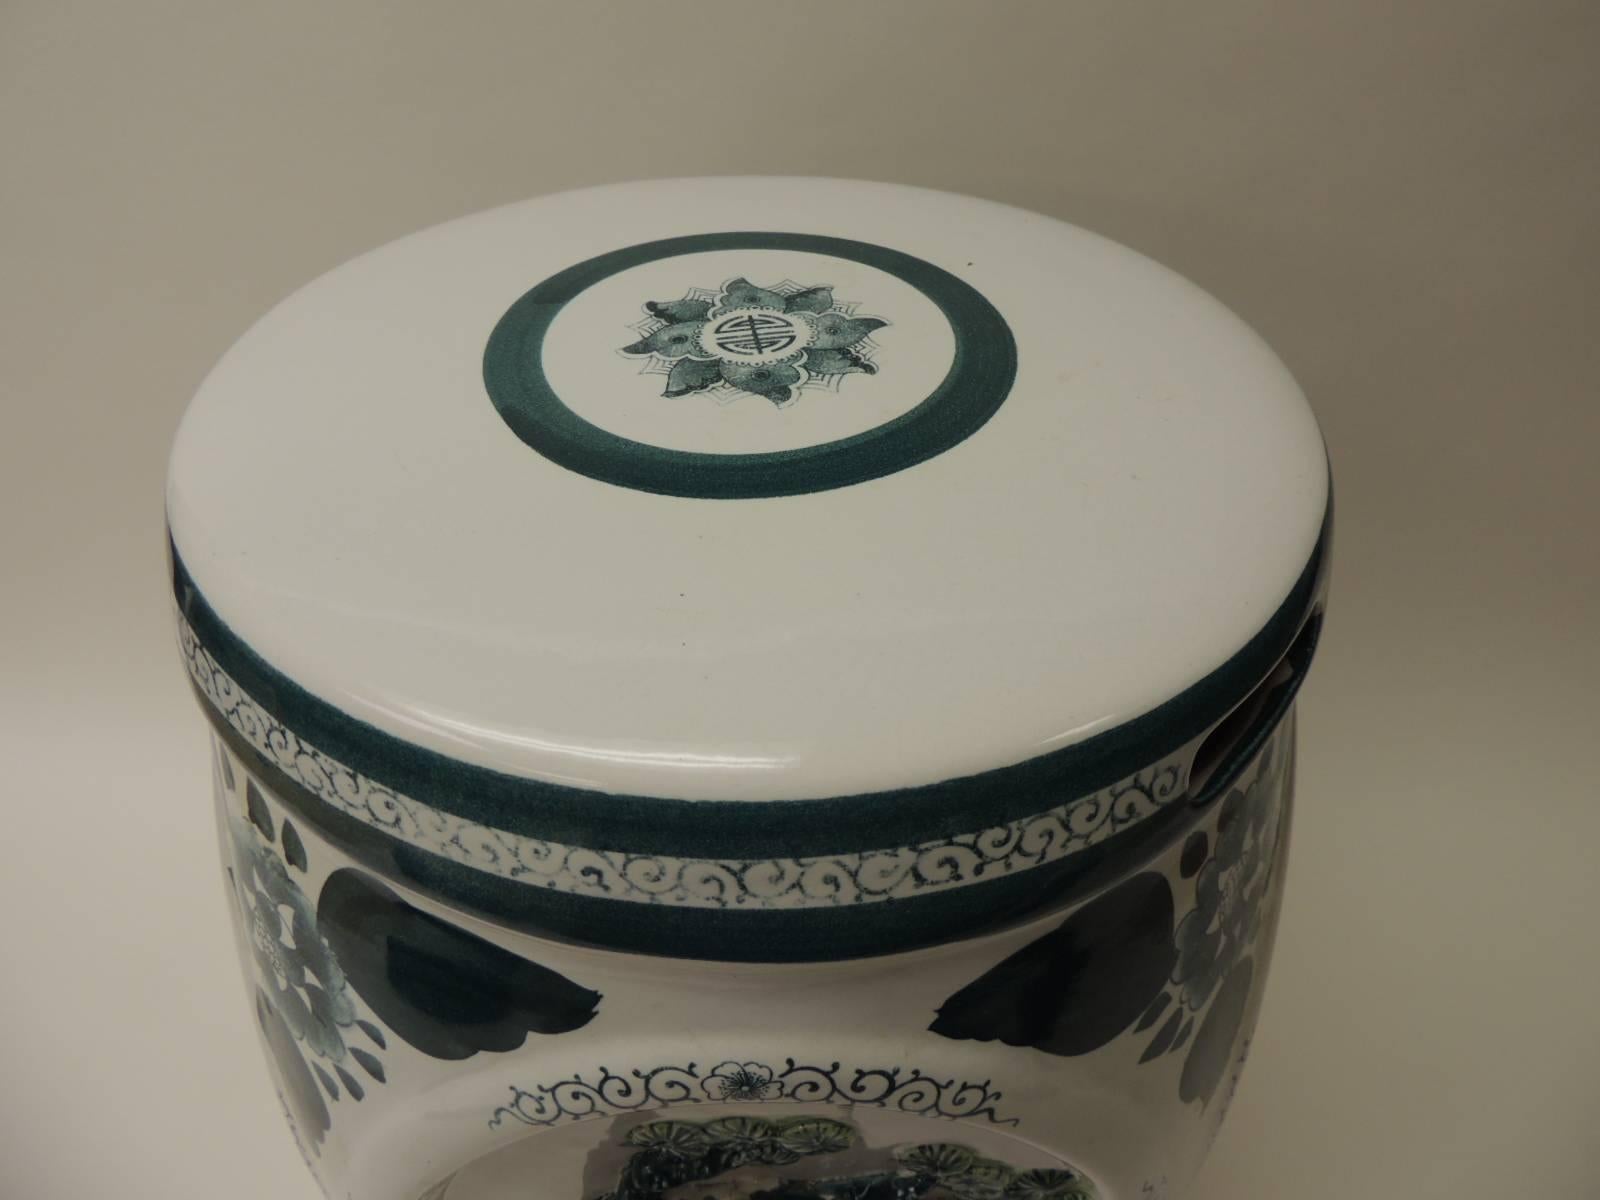 Vintage round hand-painted green and white ceramic Chinese export garden stool.  The four sides of this vintage round hand-painted white and green garden stool are different. One side depicts an oval medallion style with bamboo. The other side